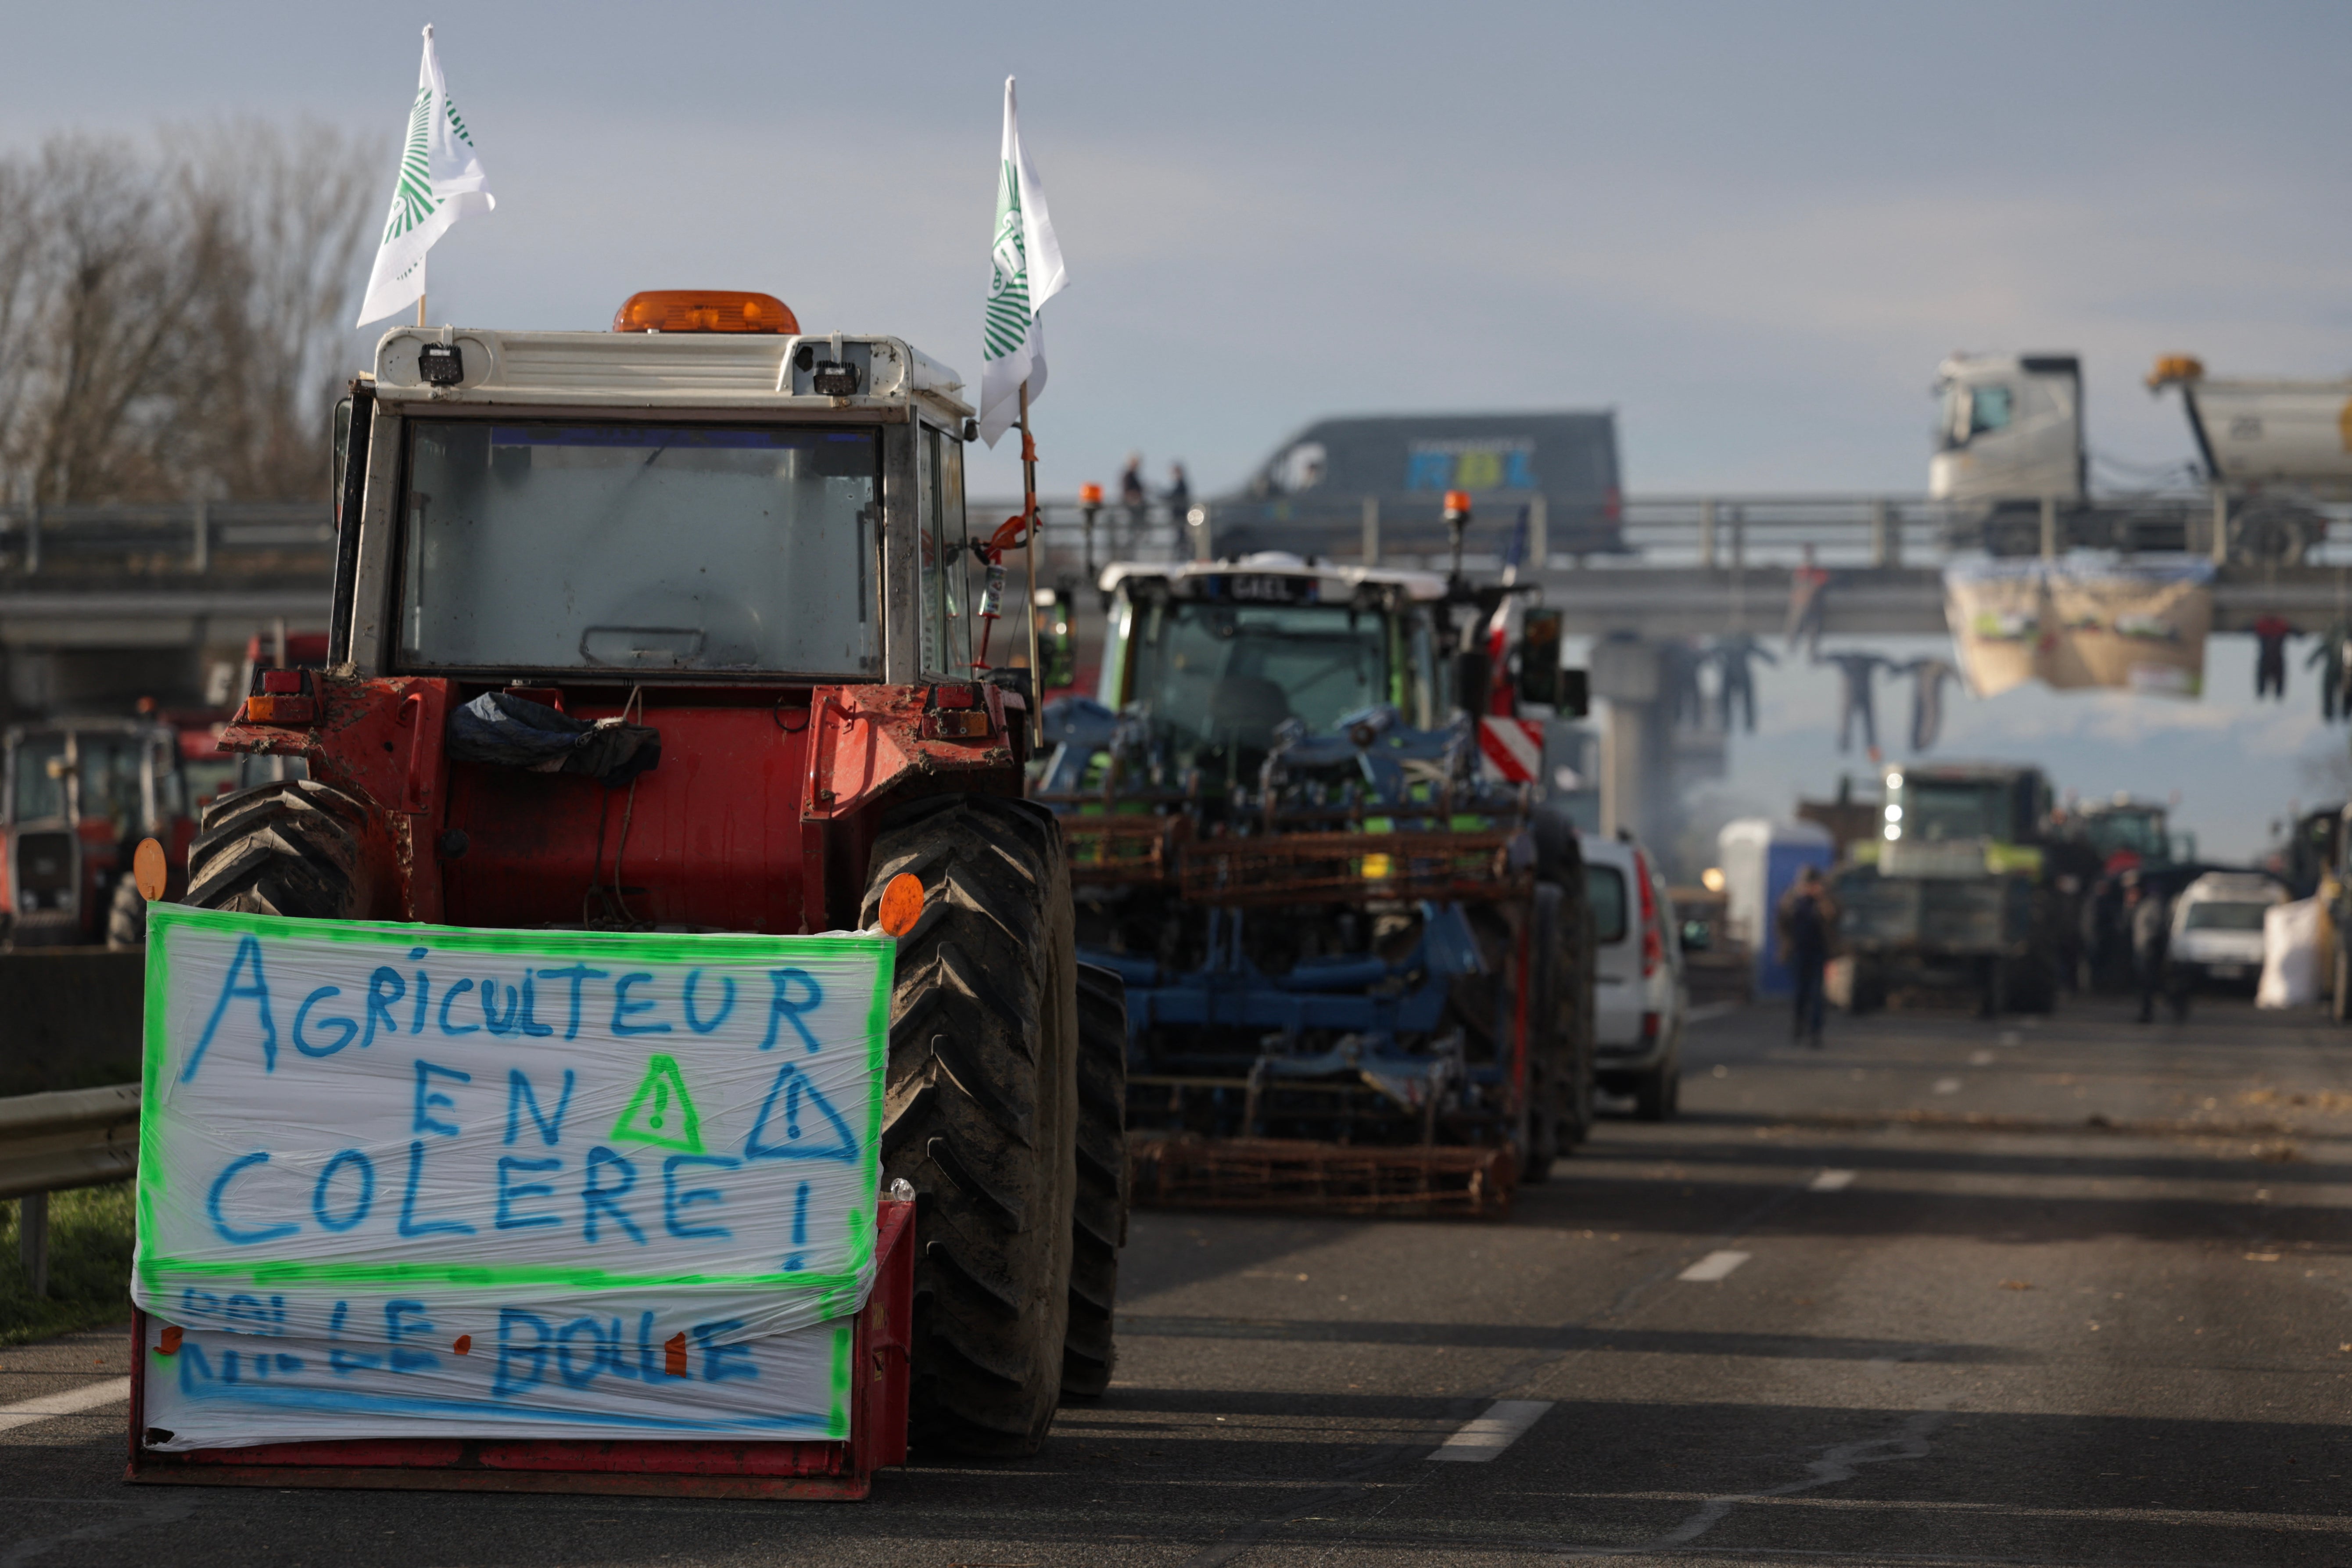 A woman has died after a car hit a roadblock set up by protesting farmers in France